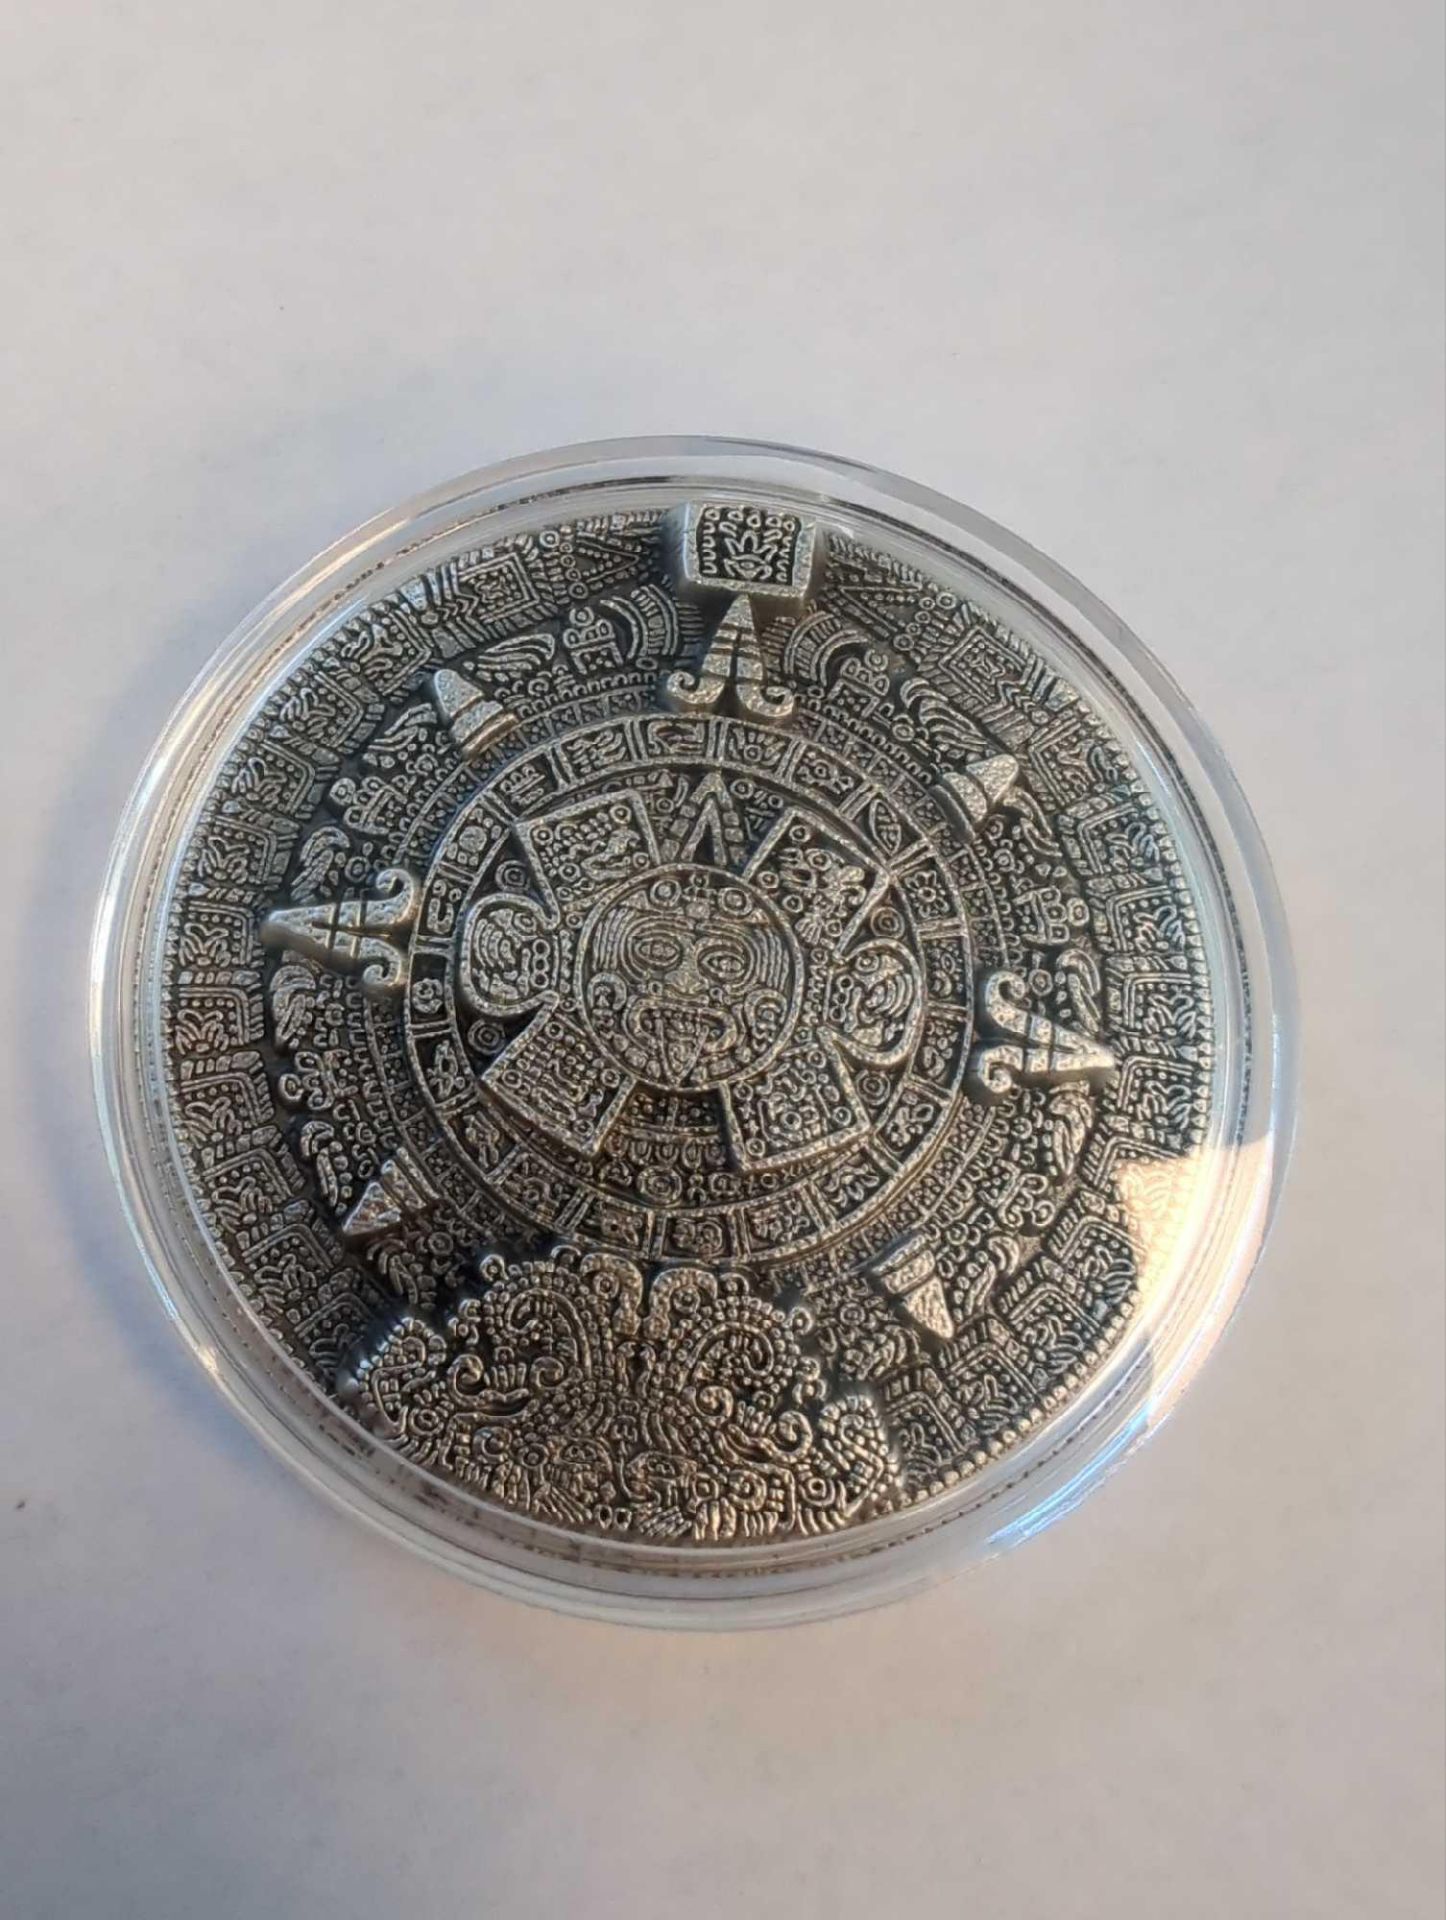 2022 South Korea 2-oz Silver Aztec Sun Stone High Relief Stacker Medal w/Antique Finish - Image 3 of 4